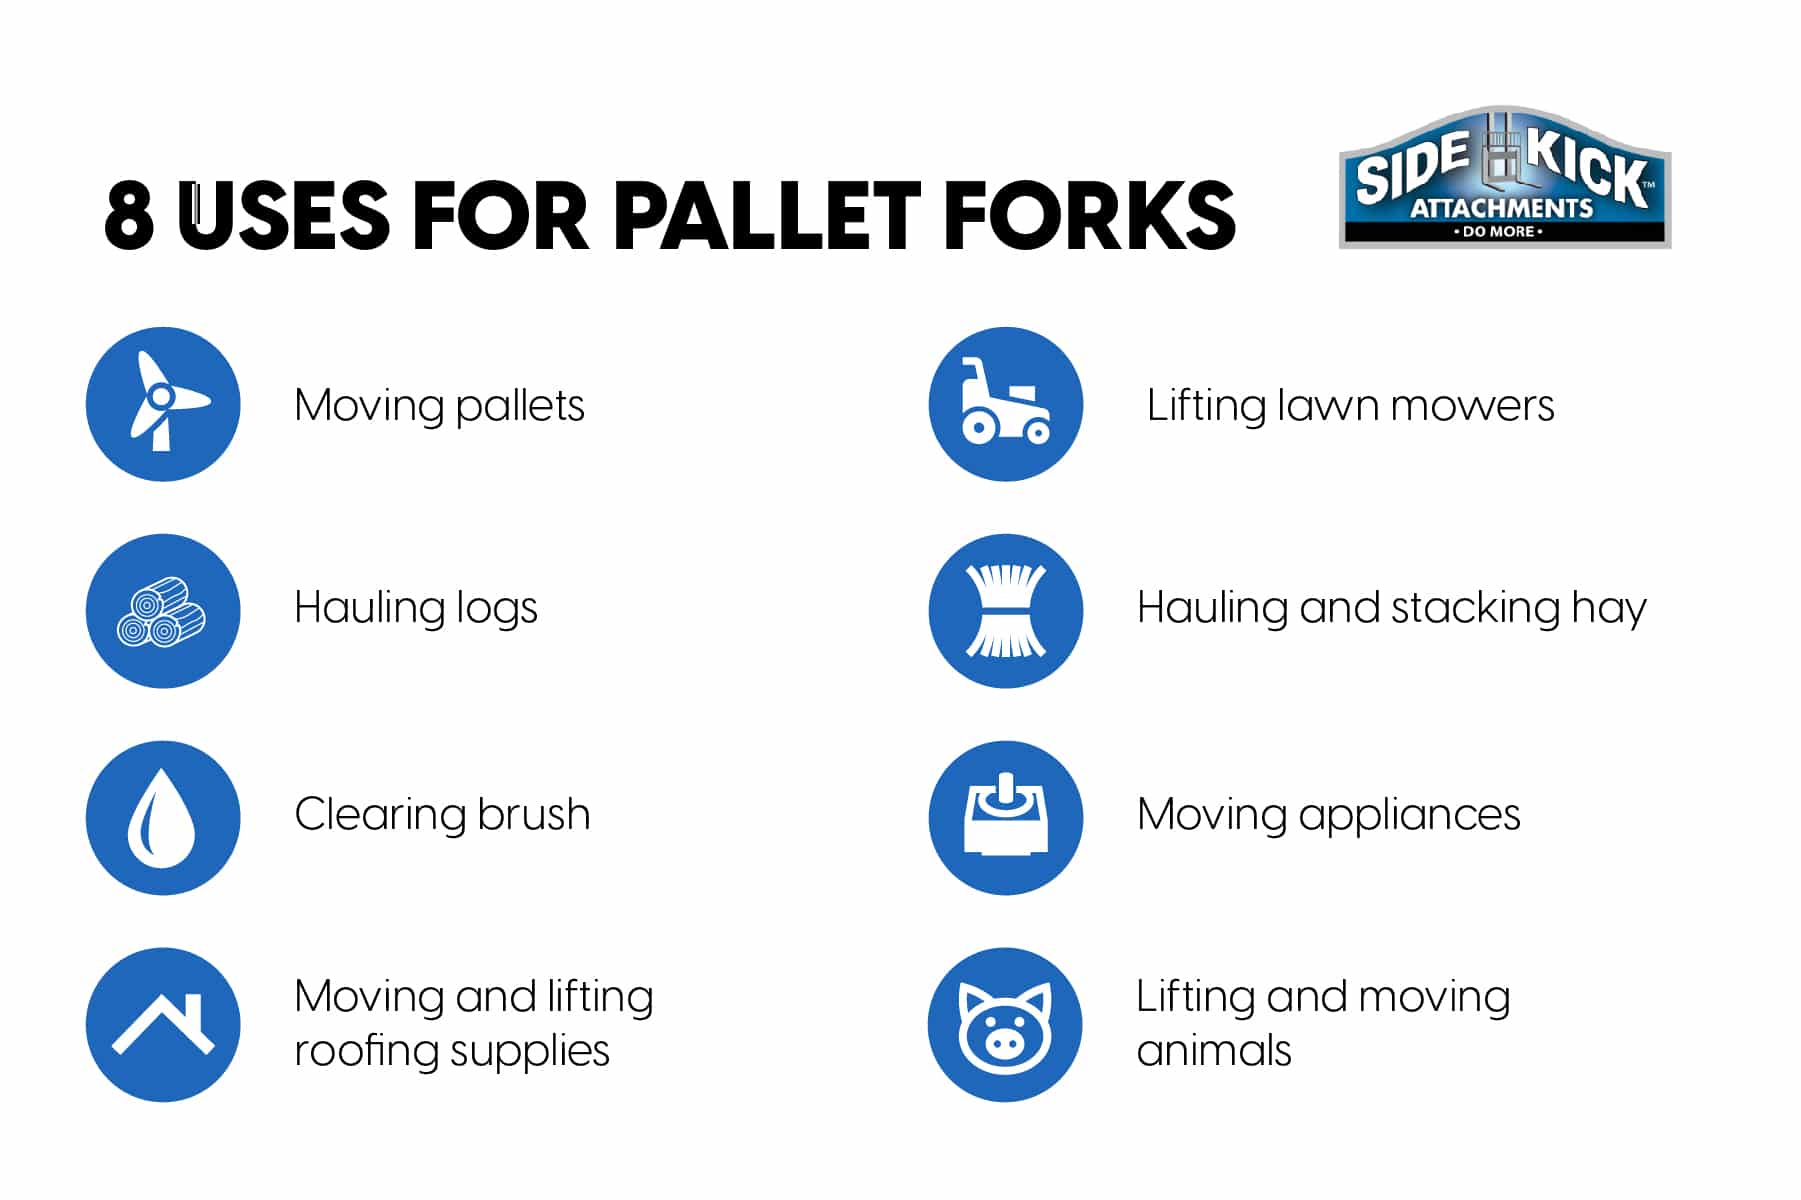 graphic showing 8 uses for pallet forks